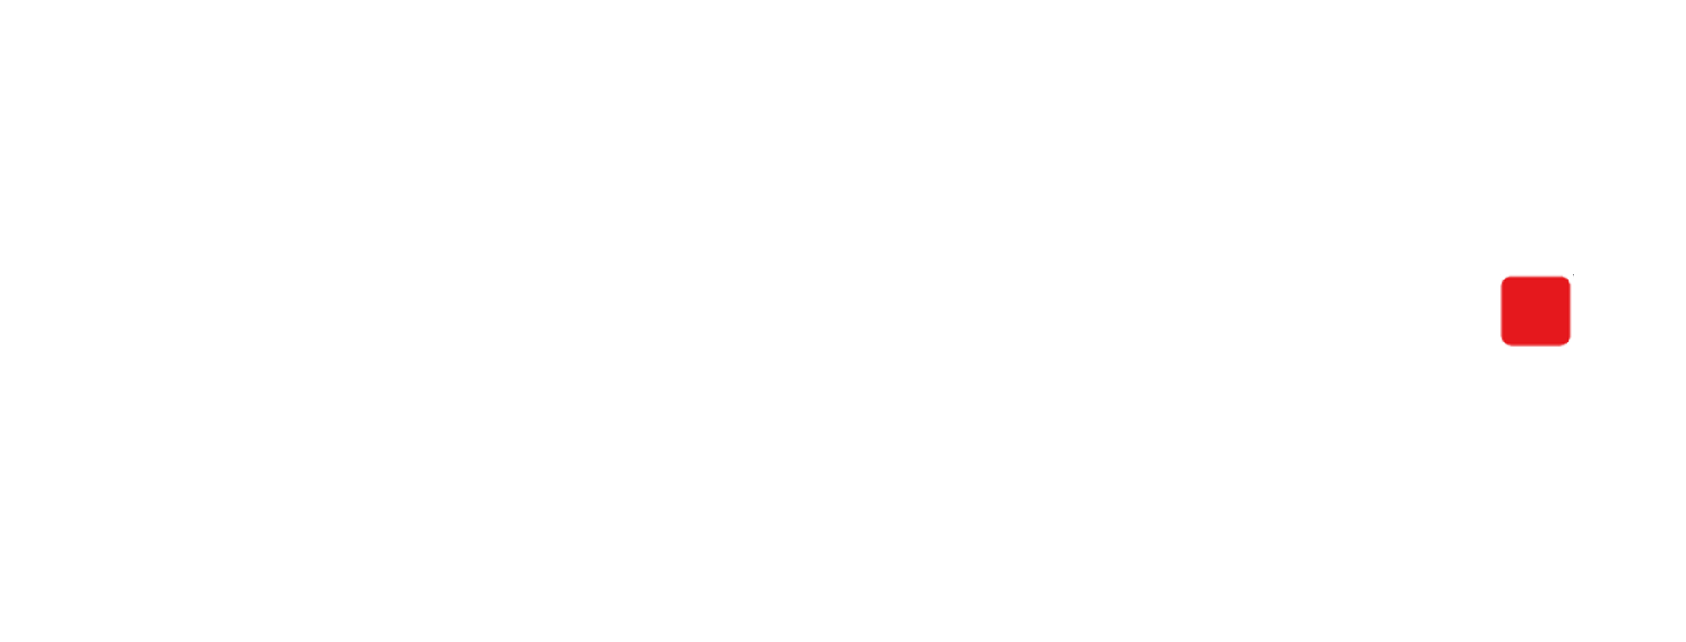 Enigma Business Solutions